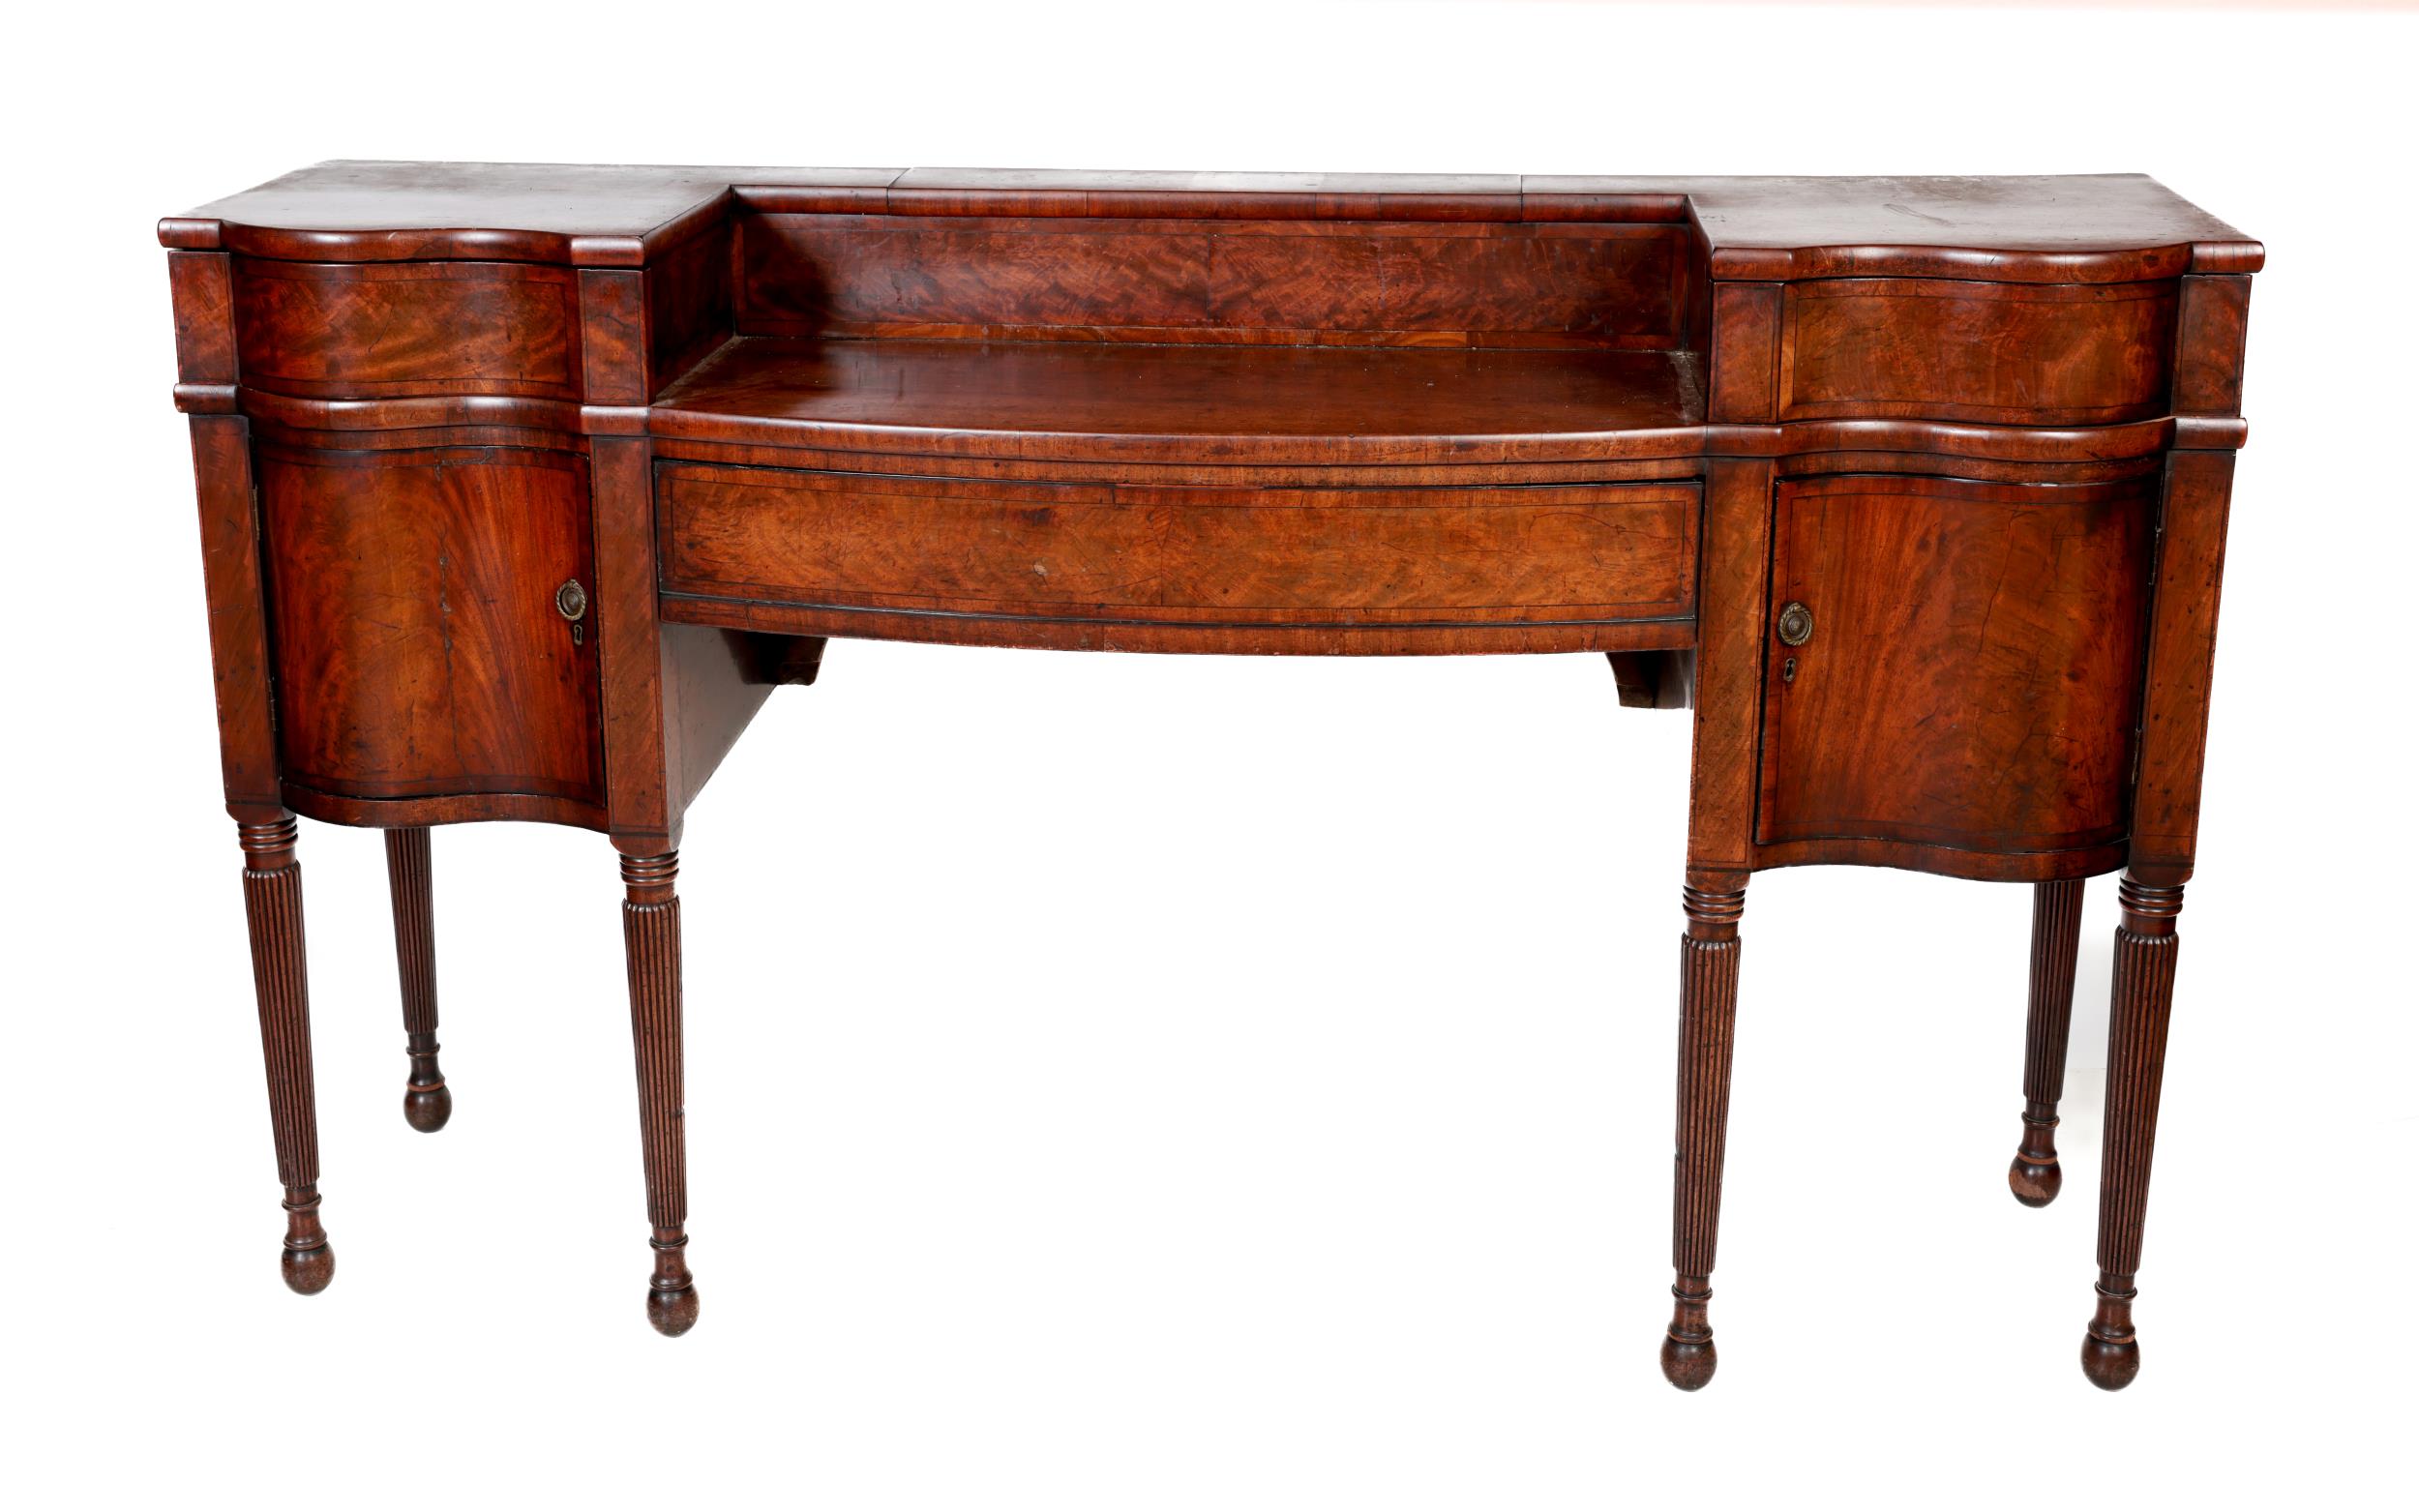 An Irish Georgian mahogany Serving Table, possibly Cork, the serpentine and bowed top with